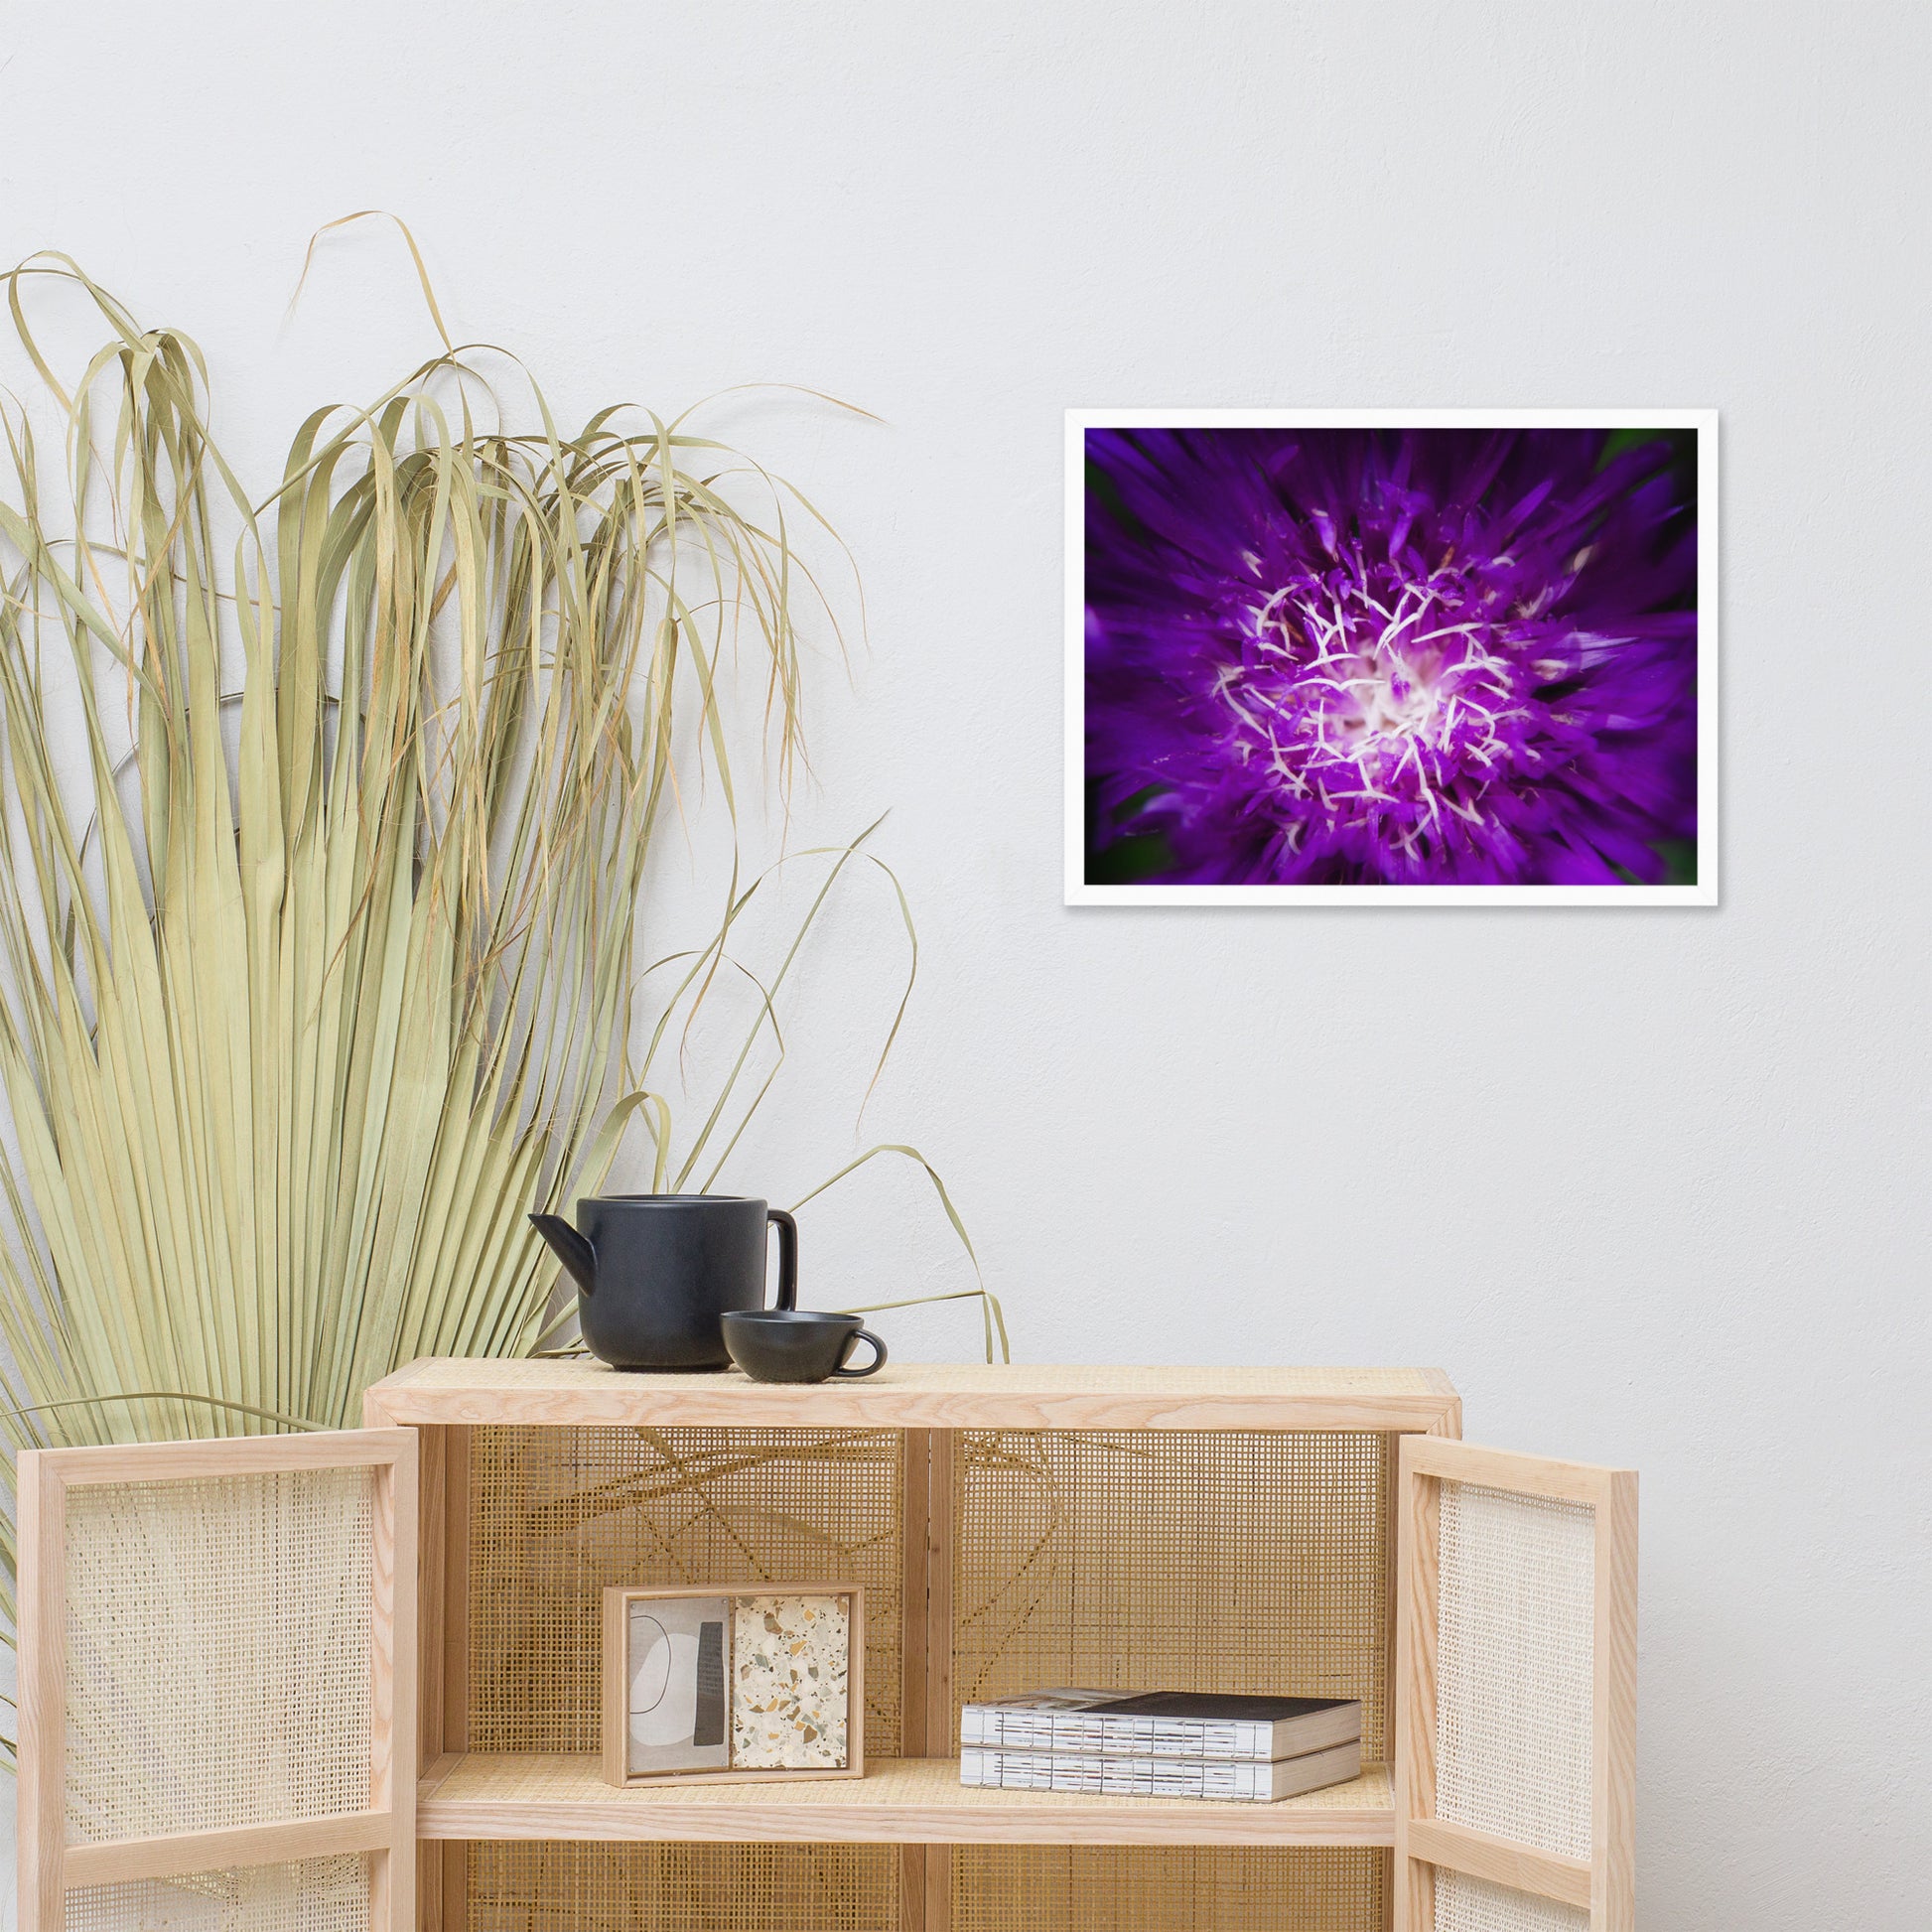 Contemporary Wall Decor For Living Room: Purple Abstract Flower - Botanical / Floral / Flora / Flowers / Nature Photograph Framed Wall Art Print - Artwork - Wall Decor